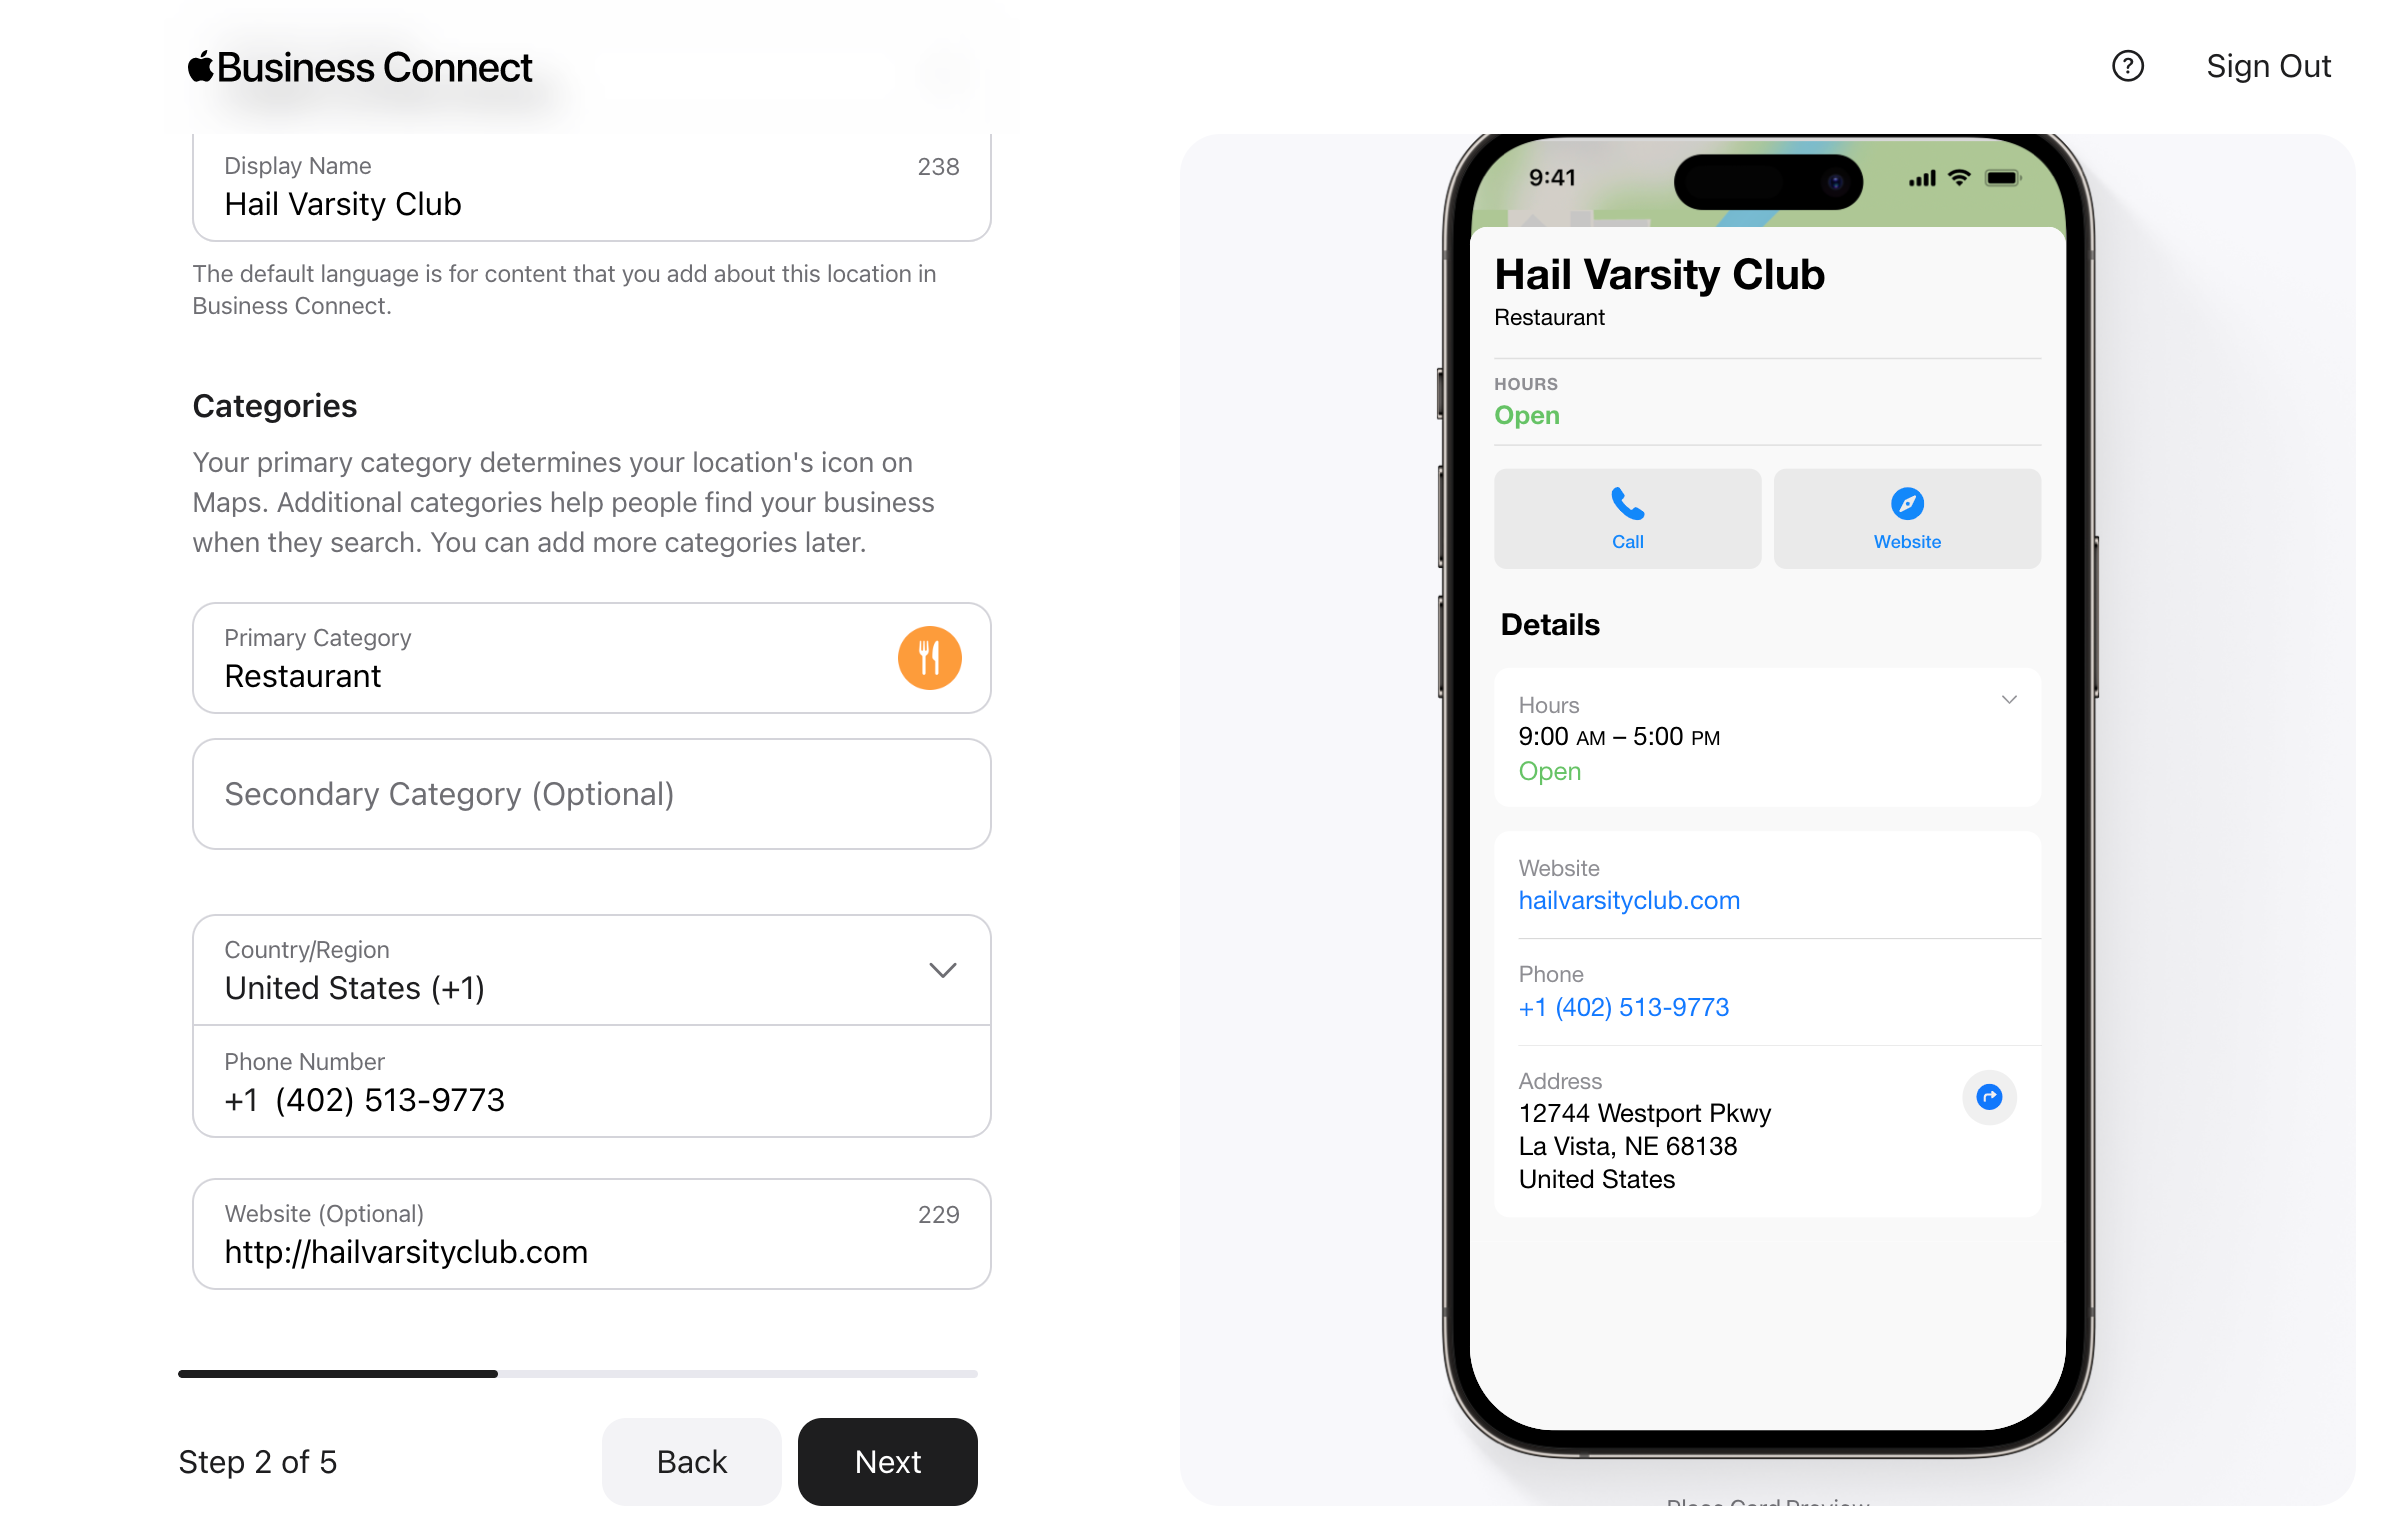 Screenshot of Apple Business Connect step 2 with Hail Varsity Club name, categories, phone number, and website information shown